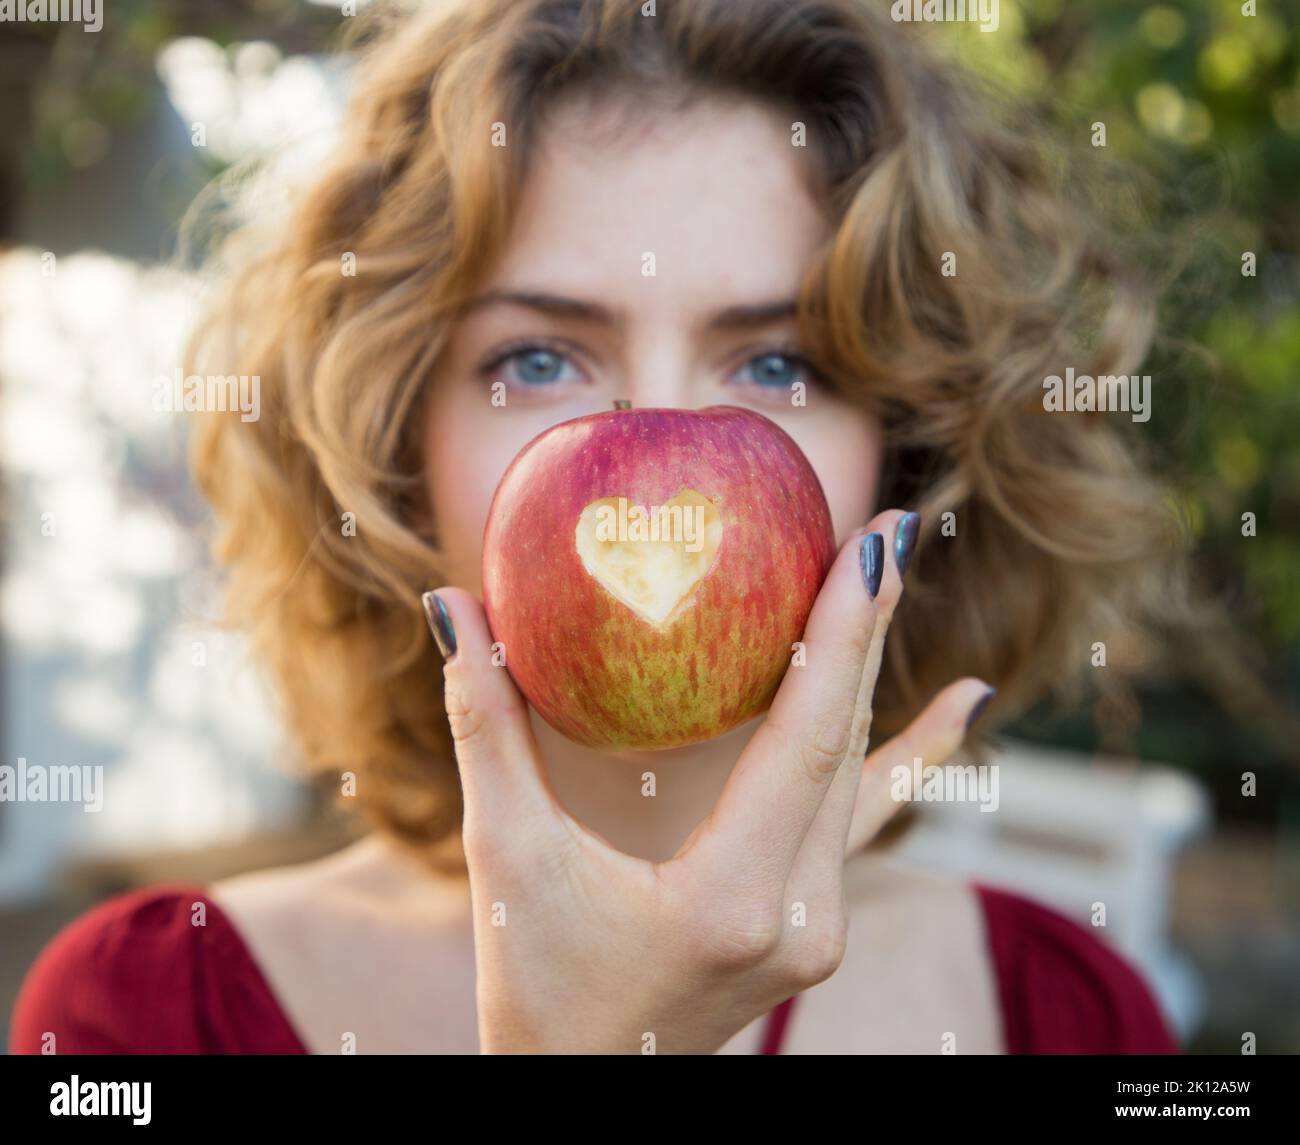 healthy eating - young woman holds a red apple in front of her face with a heart cut out in it. selective focus. proper vitamin nutrition. love concep Stock Photo